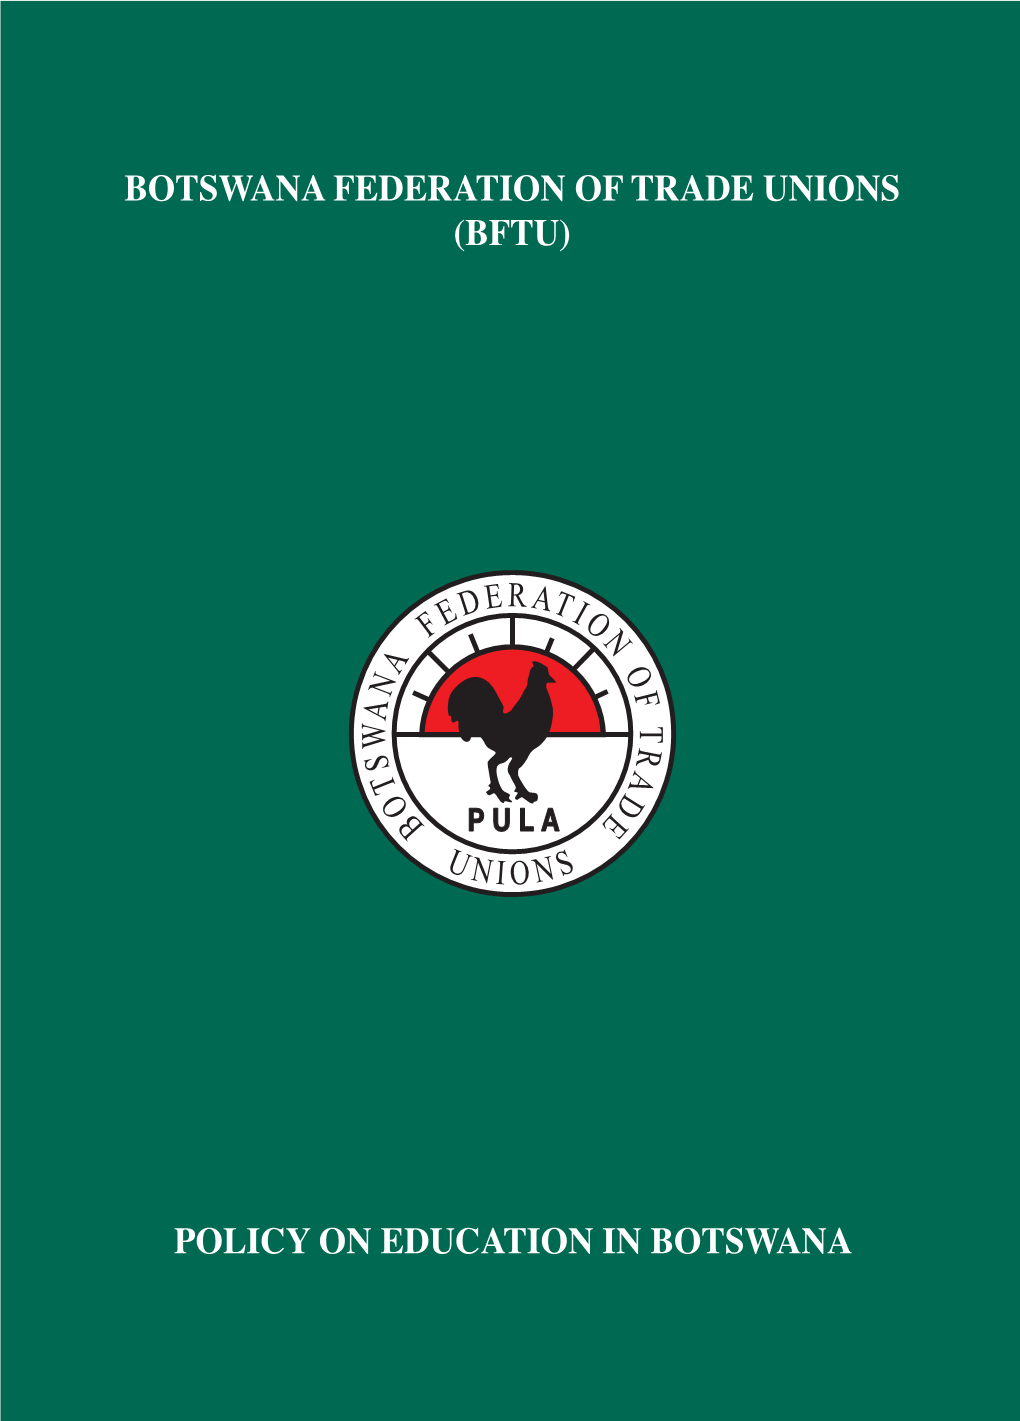 POLICY on EDUCATION in BOTSWANA Published by the Botswana Federation of Trade Unions (BFTU) March, 2007